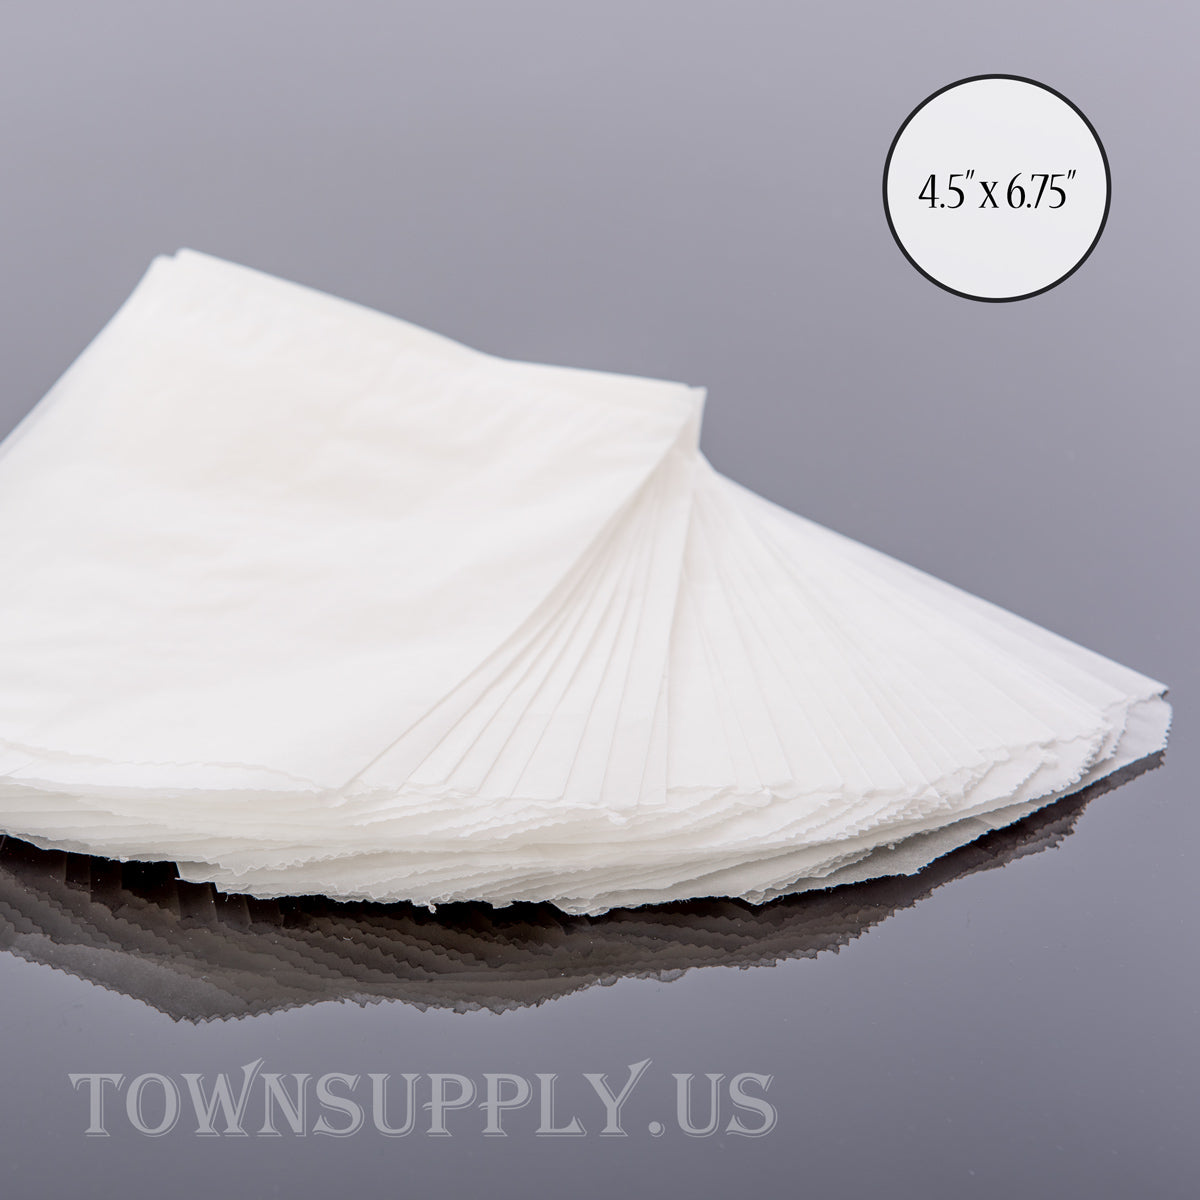 50 pack - flat glassine bags, 4.5" x 6.75" translucent waxed paper envelopes - Town Supply